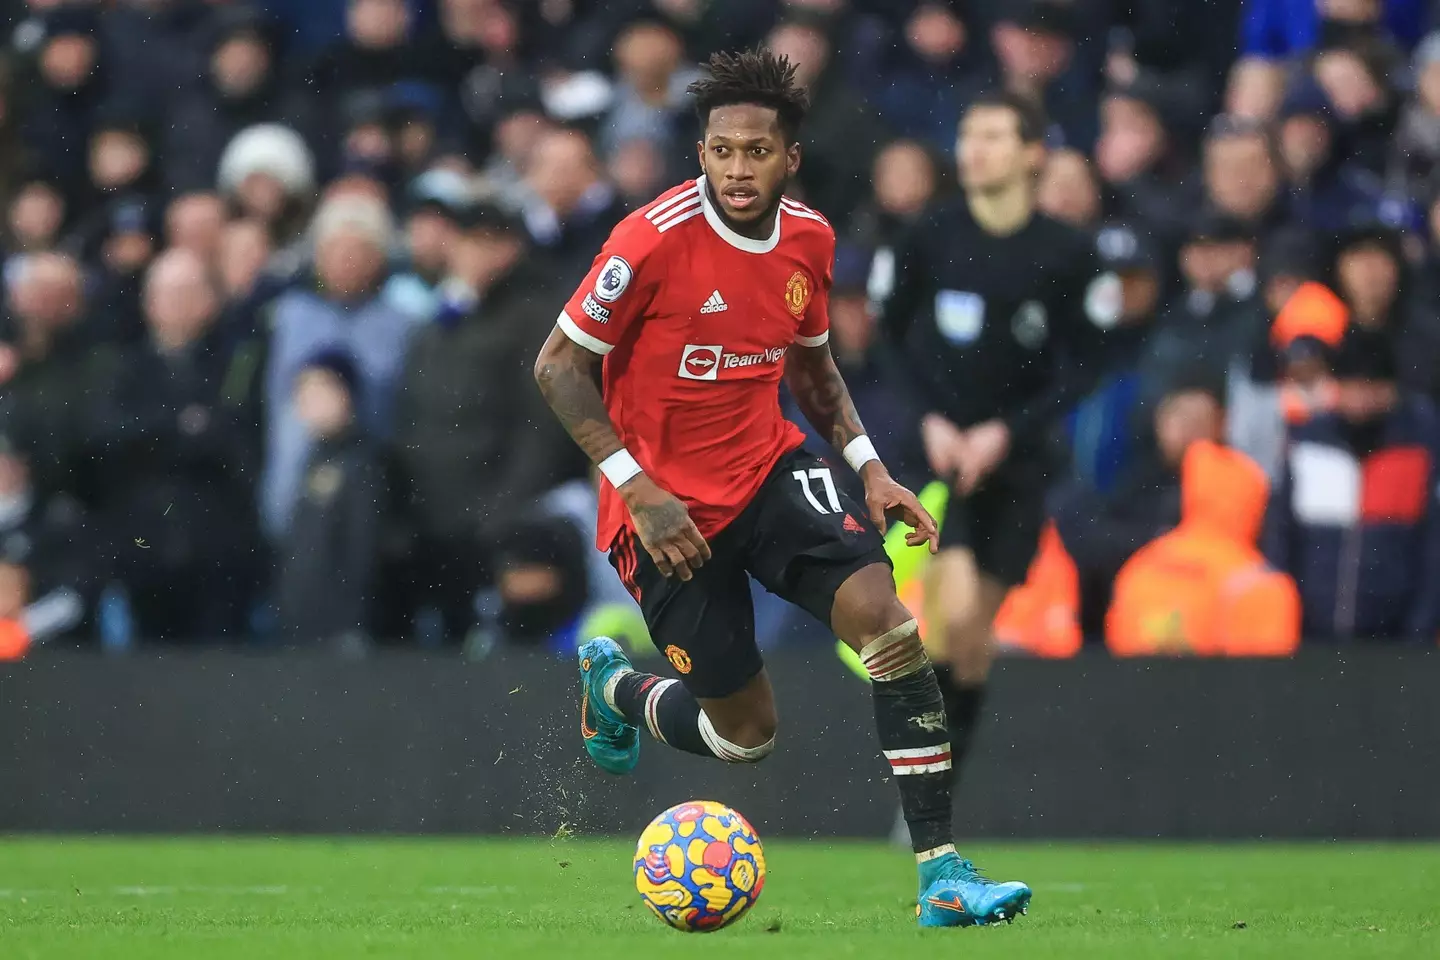 United spent nearly £50 million on Fred and he's come in for a lot of criticism, although he's far from their worst offender this season. Image: PA Images